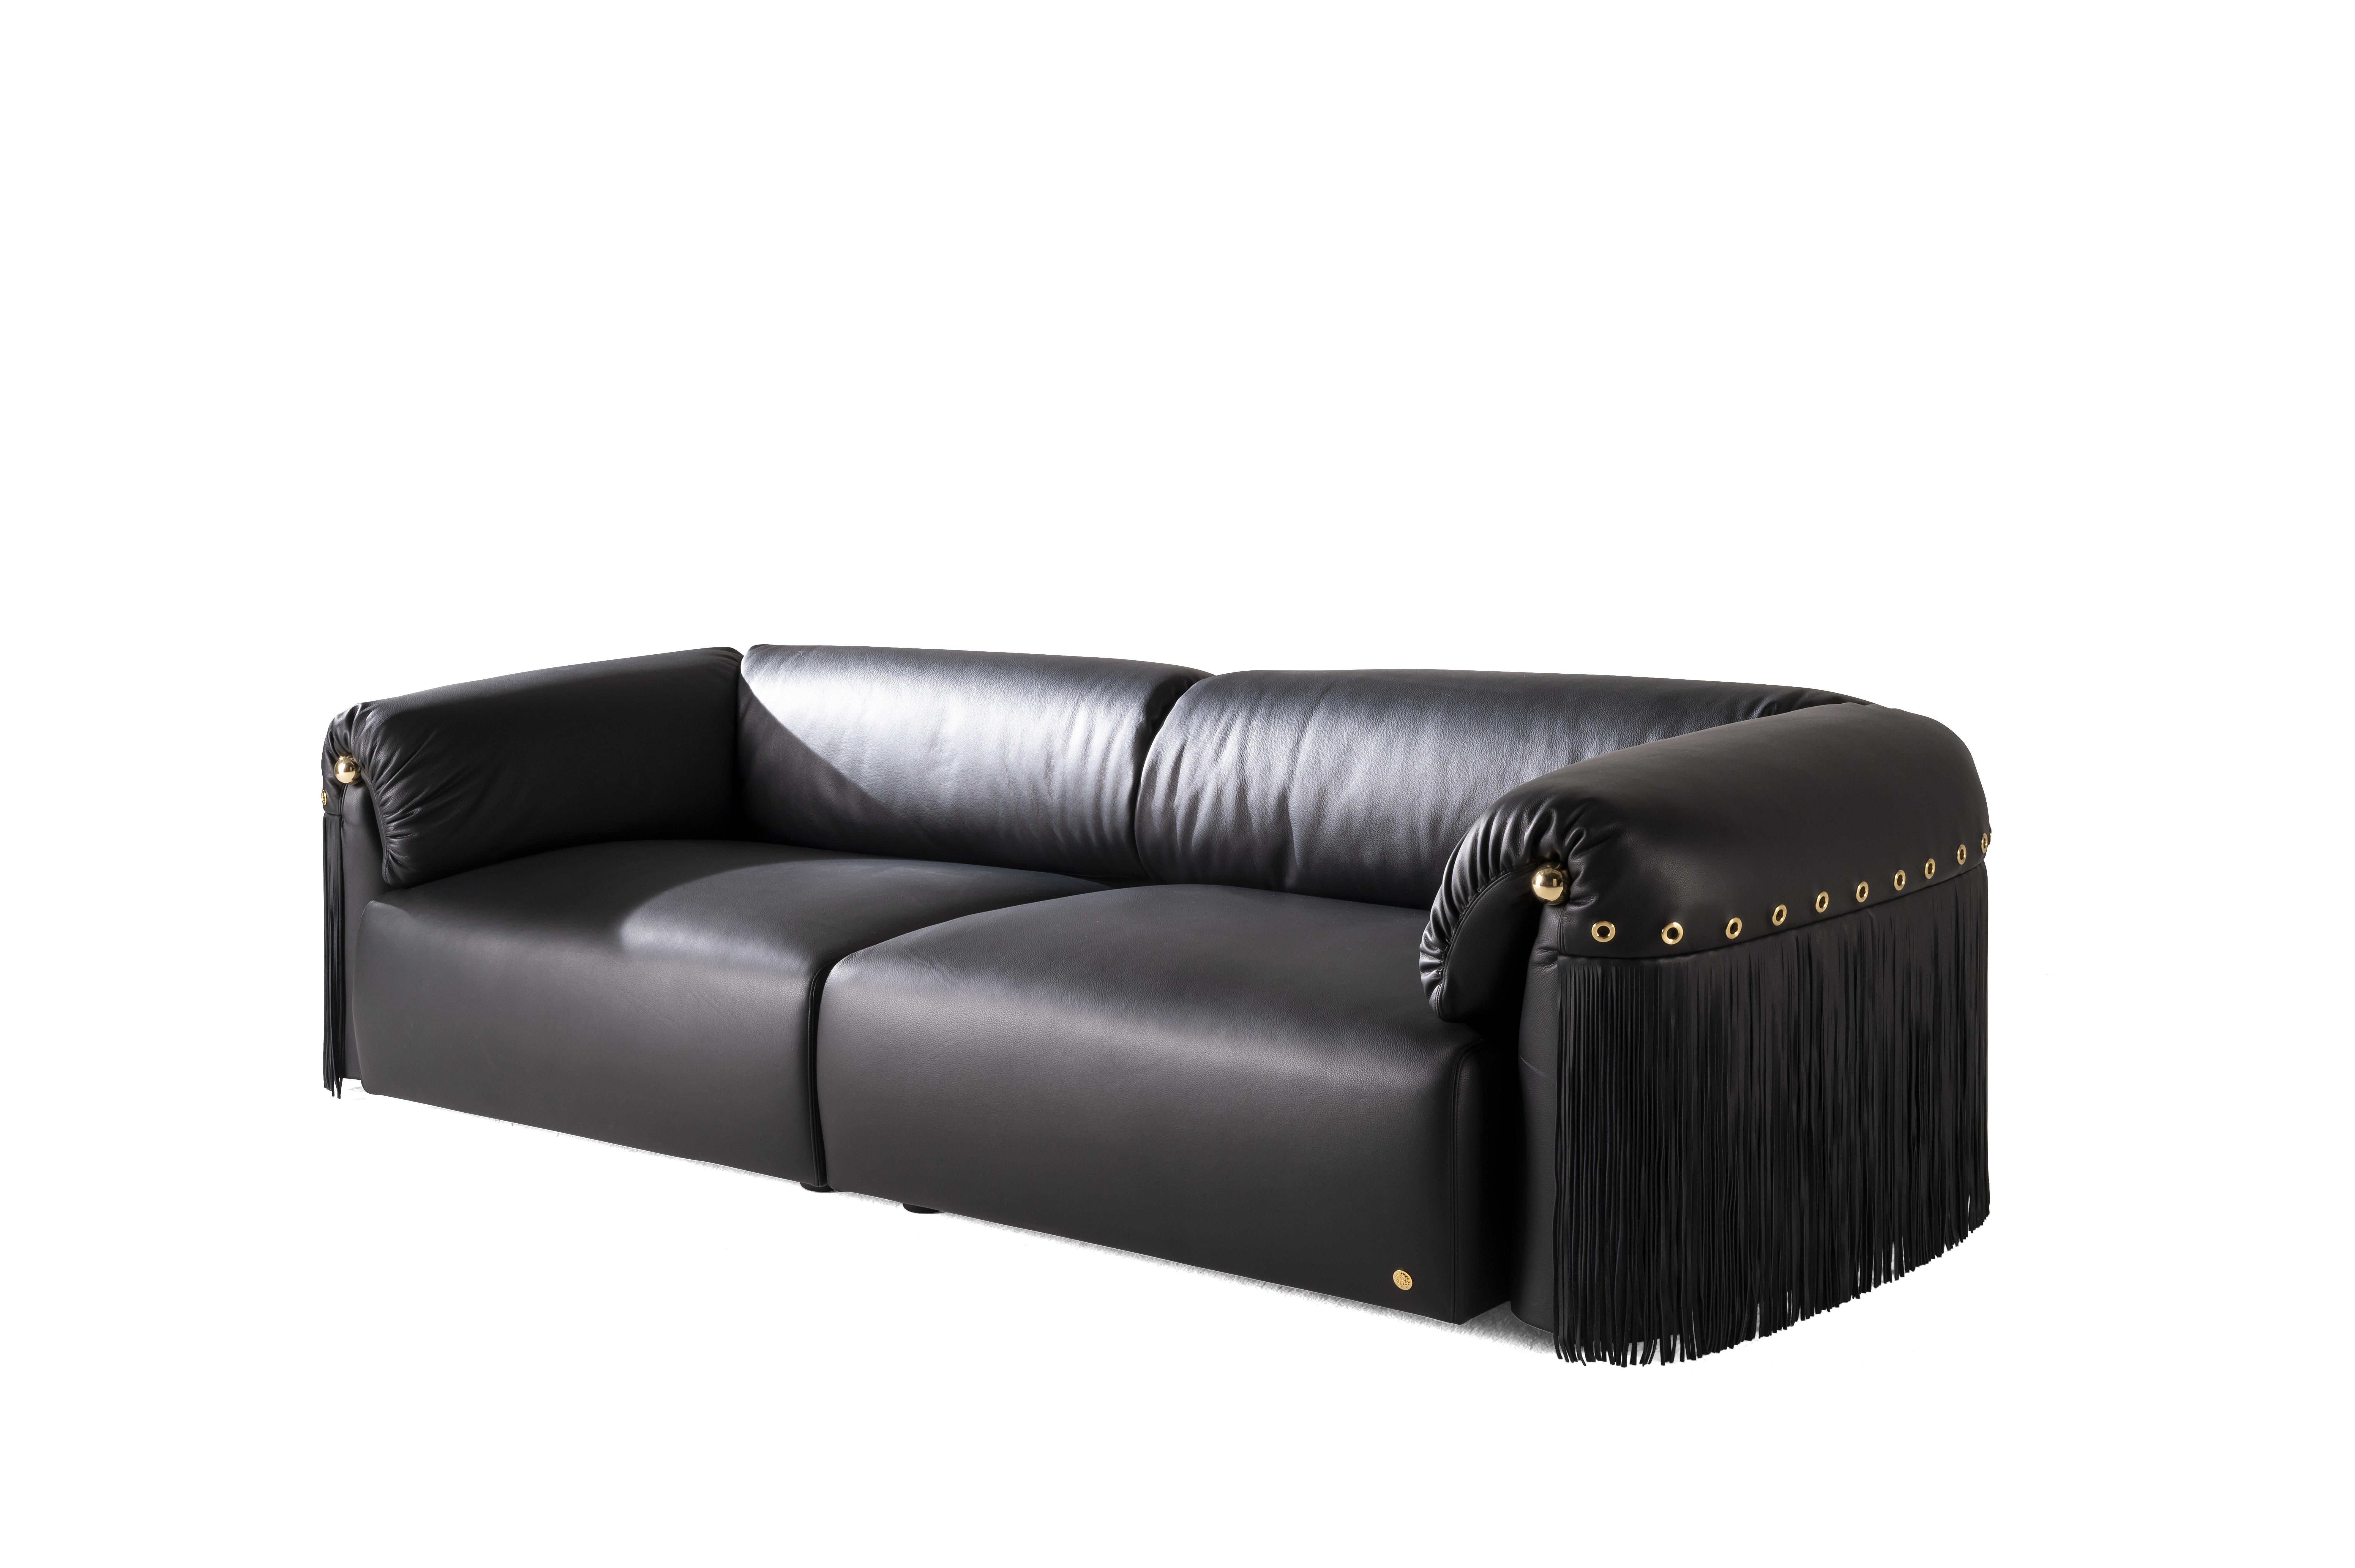 21st Century Malawi Sofa in Black Leather by Roberto Cavalli Home Interiors In New Condition For Sale In Cantù, Lombardia